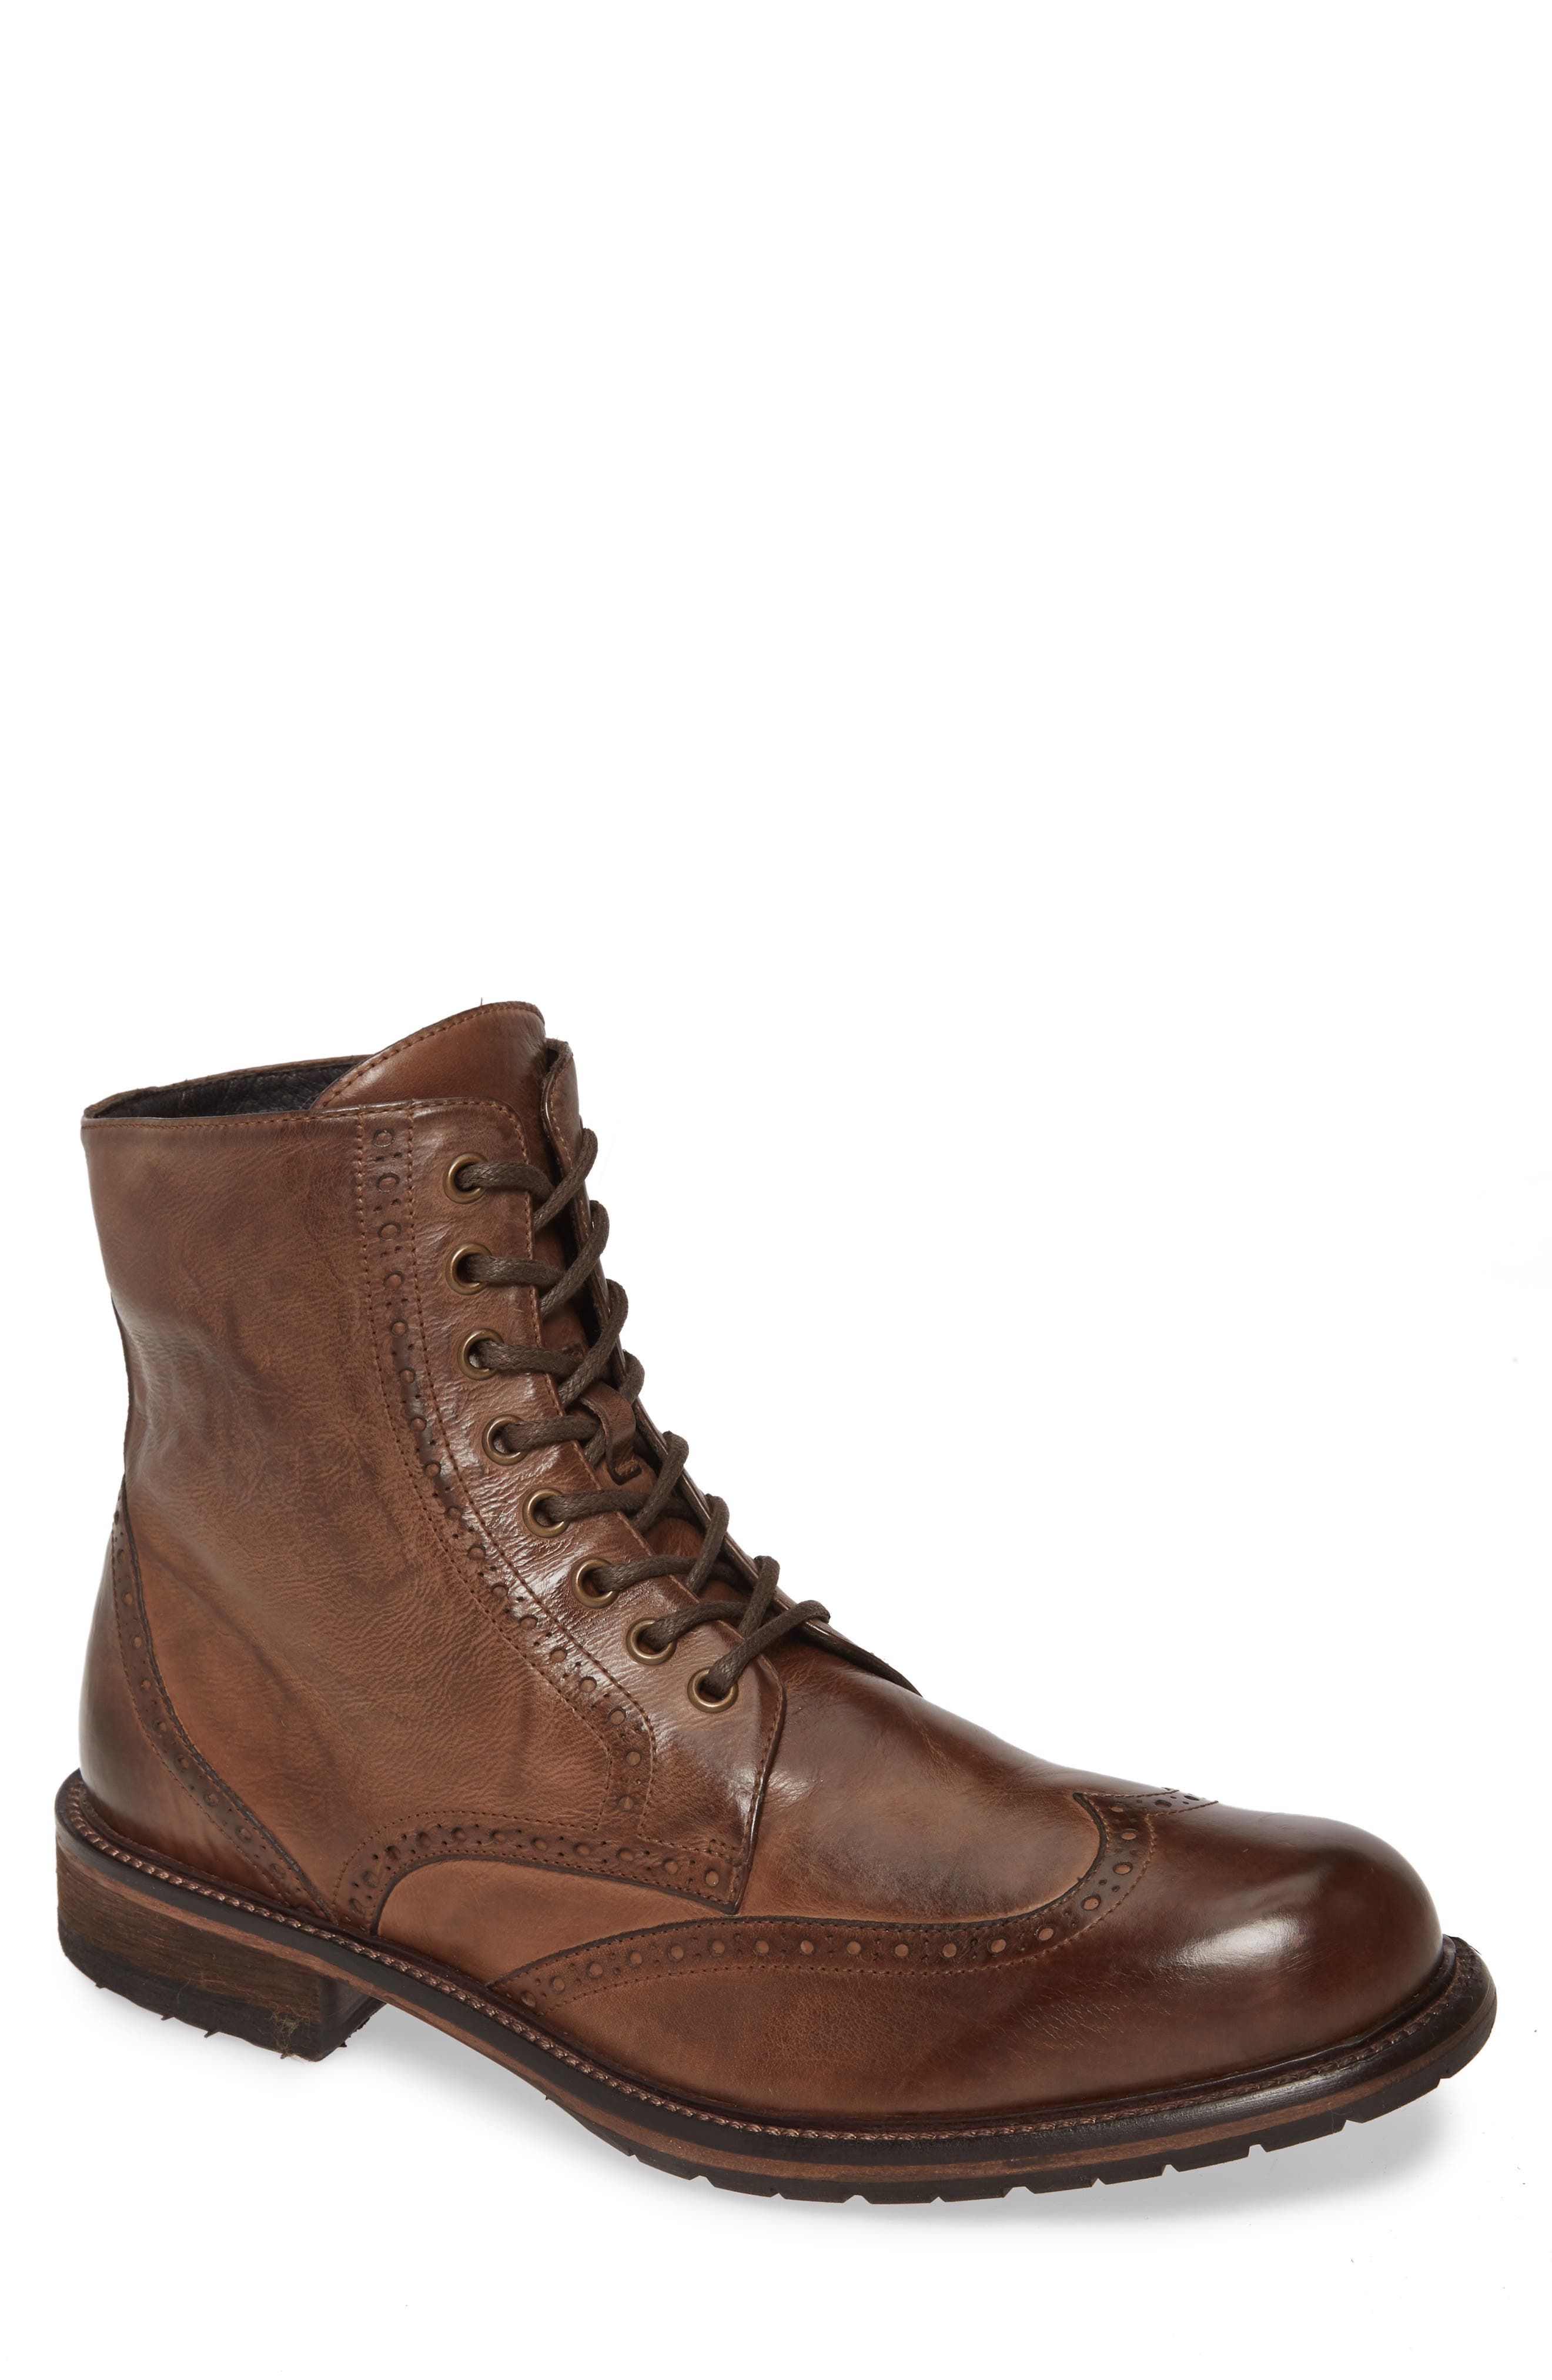 johnston and murphy wingtip boots